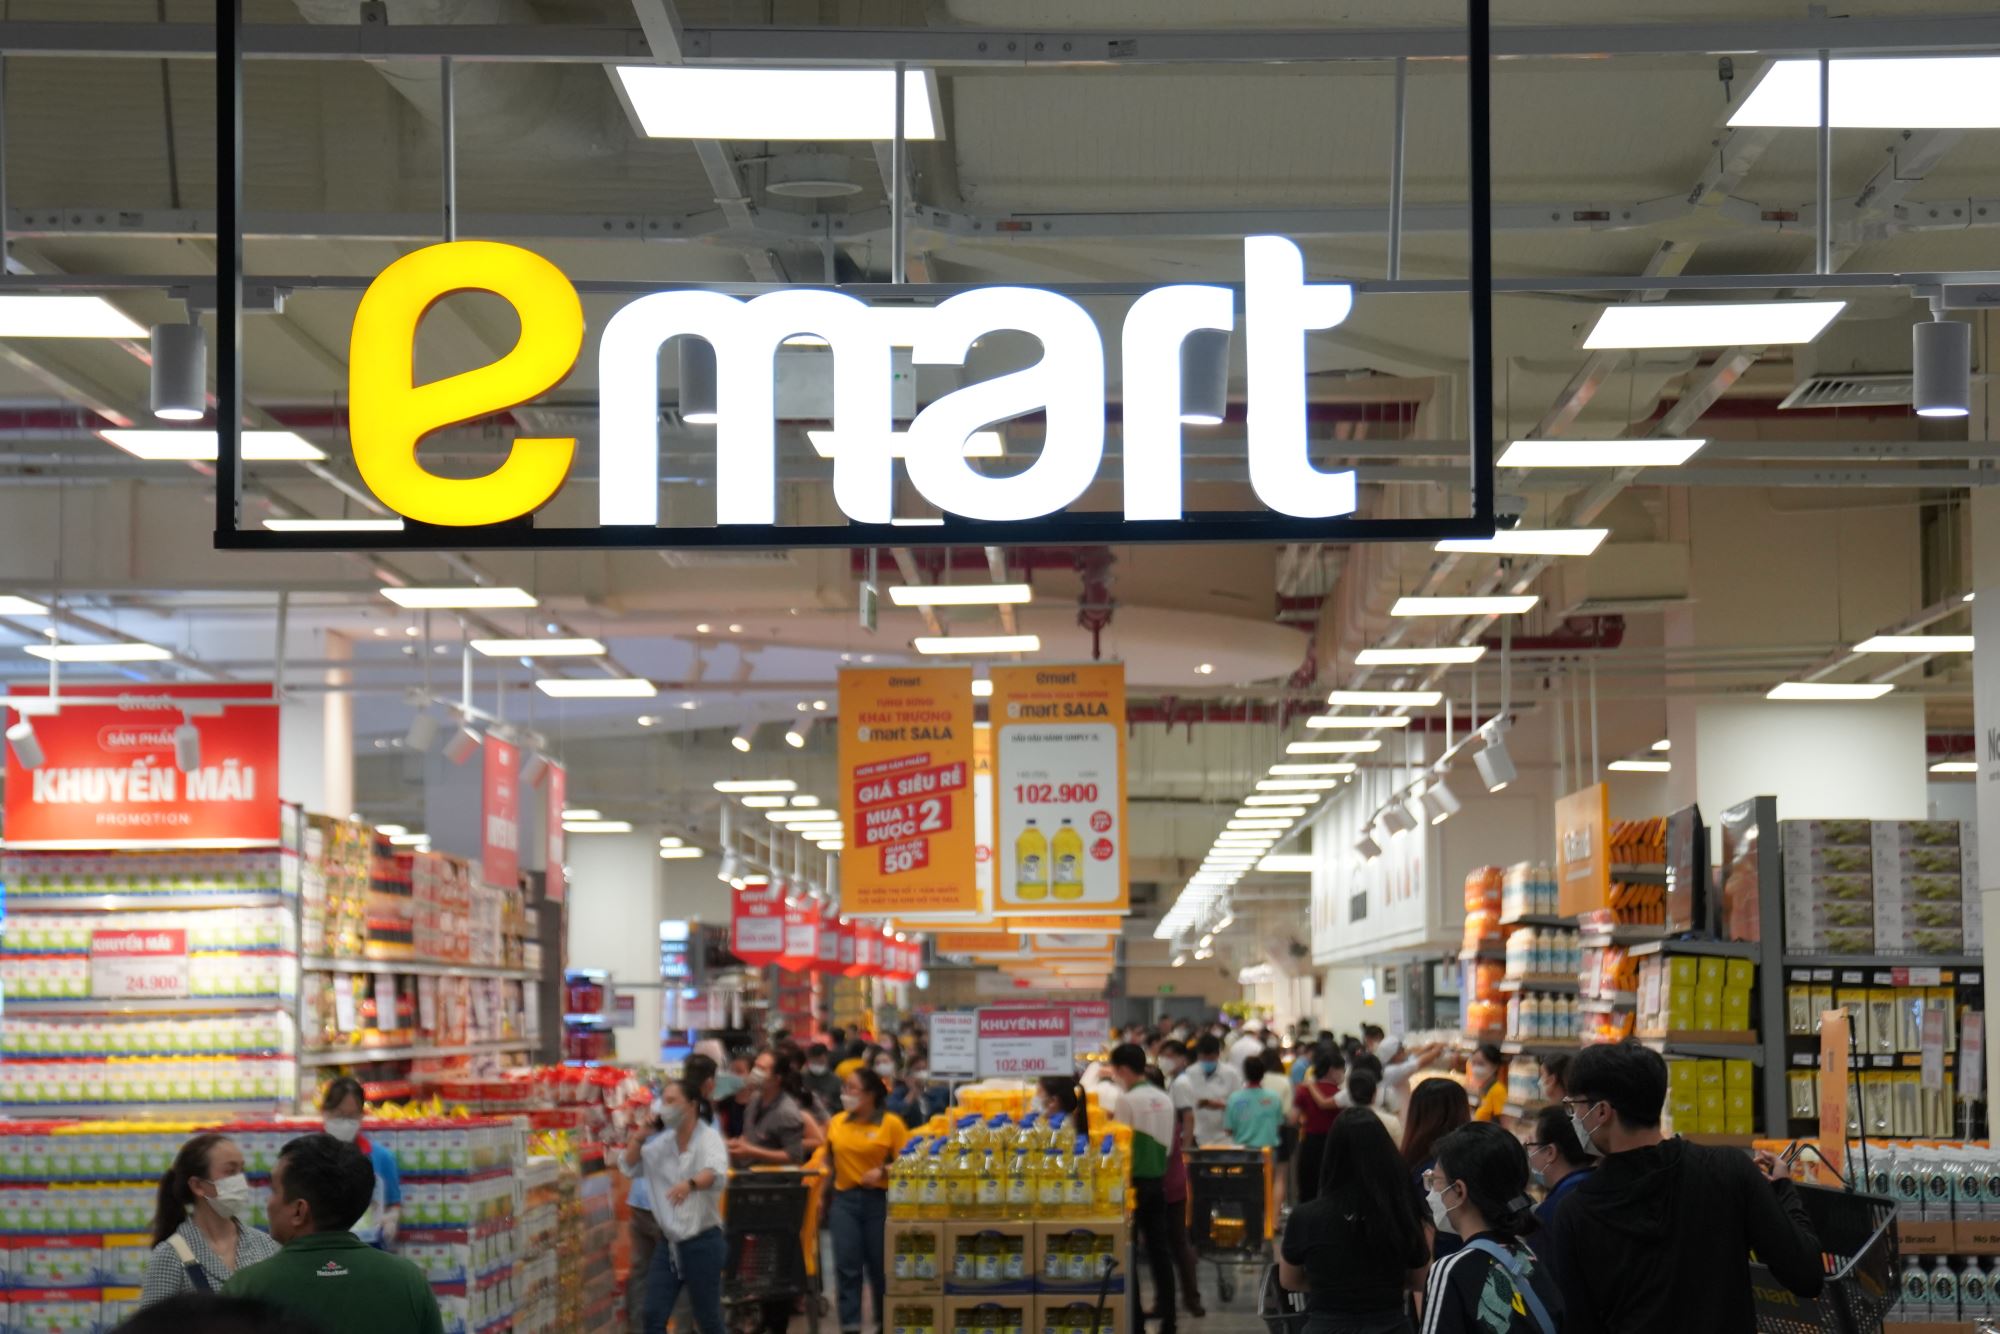 As the main part of a shopping mall, Emart offers a large range of Korean items